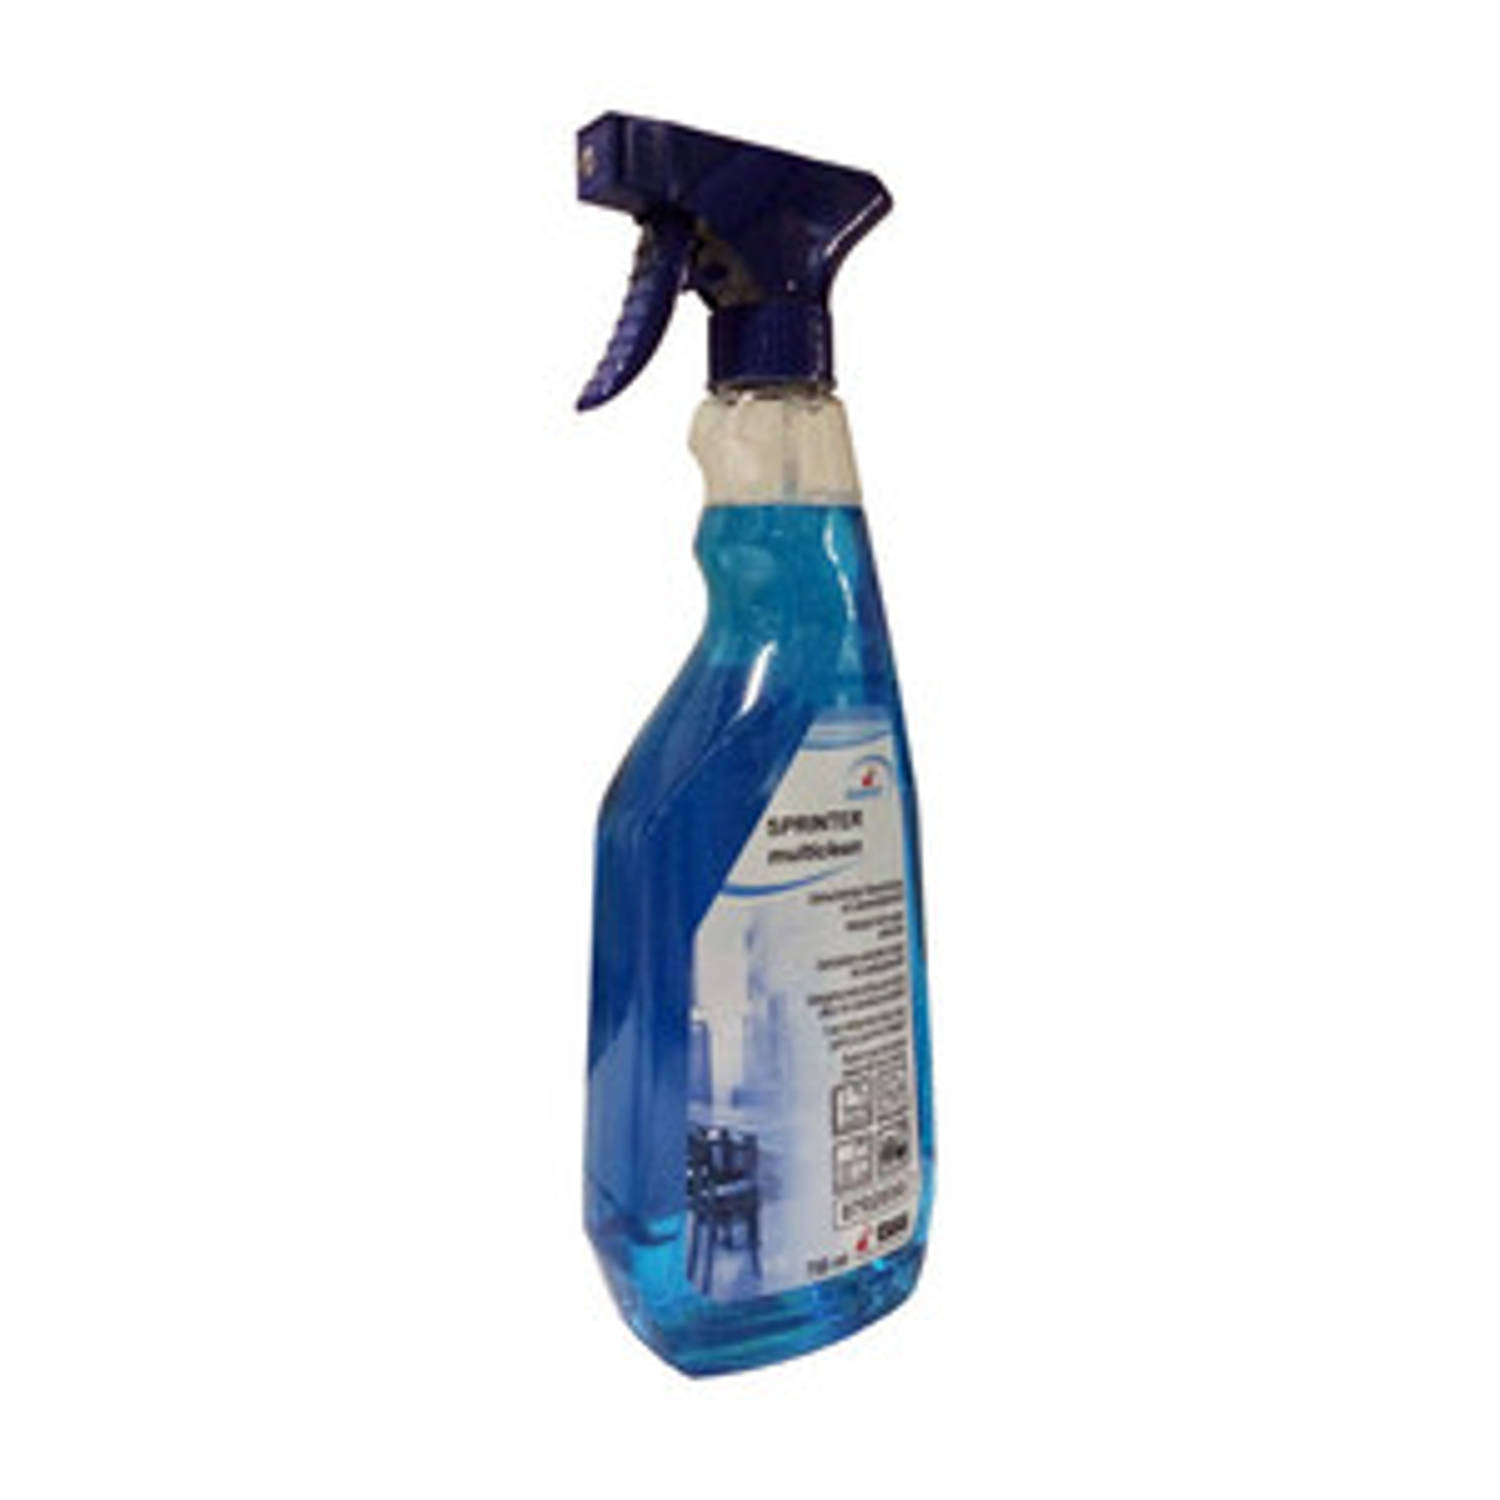 Green care | Tanet | Multiclean | 750 ml